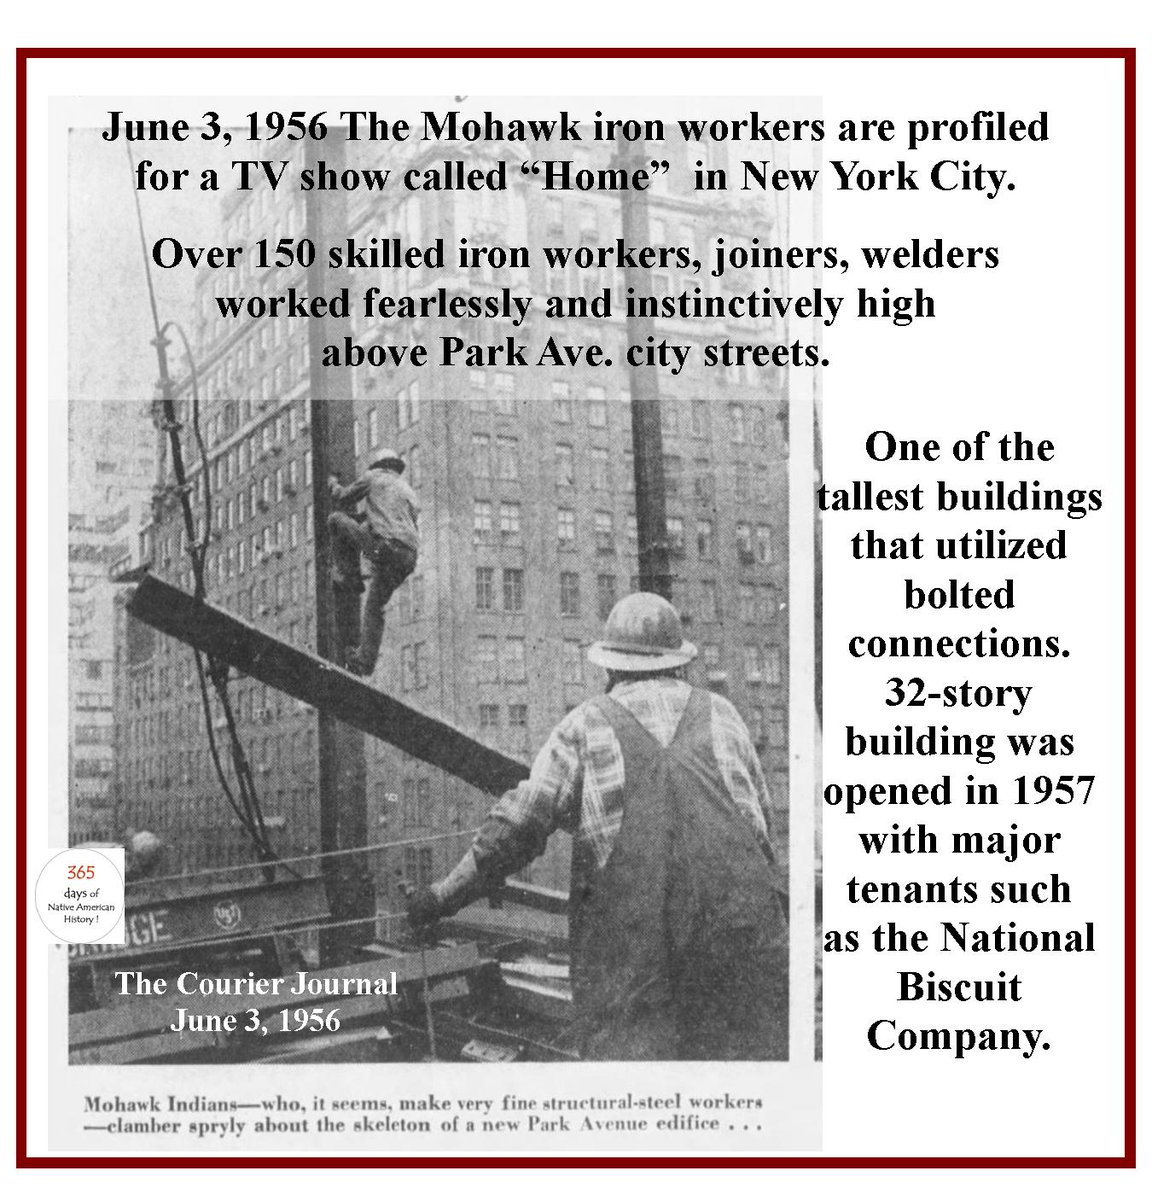 #todayinnativeamericanhistory 1956, the #mohawk #ironworkers are profiled in a TV show while they build a high-rise buildings on #parkave 

#365daysofwalkingtheredroad